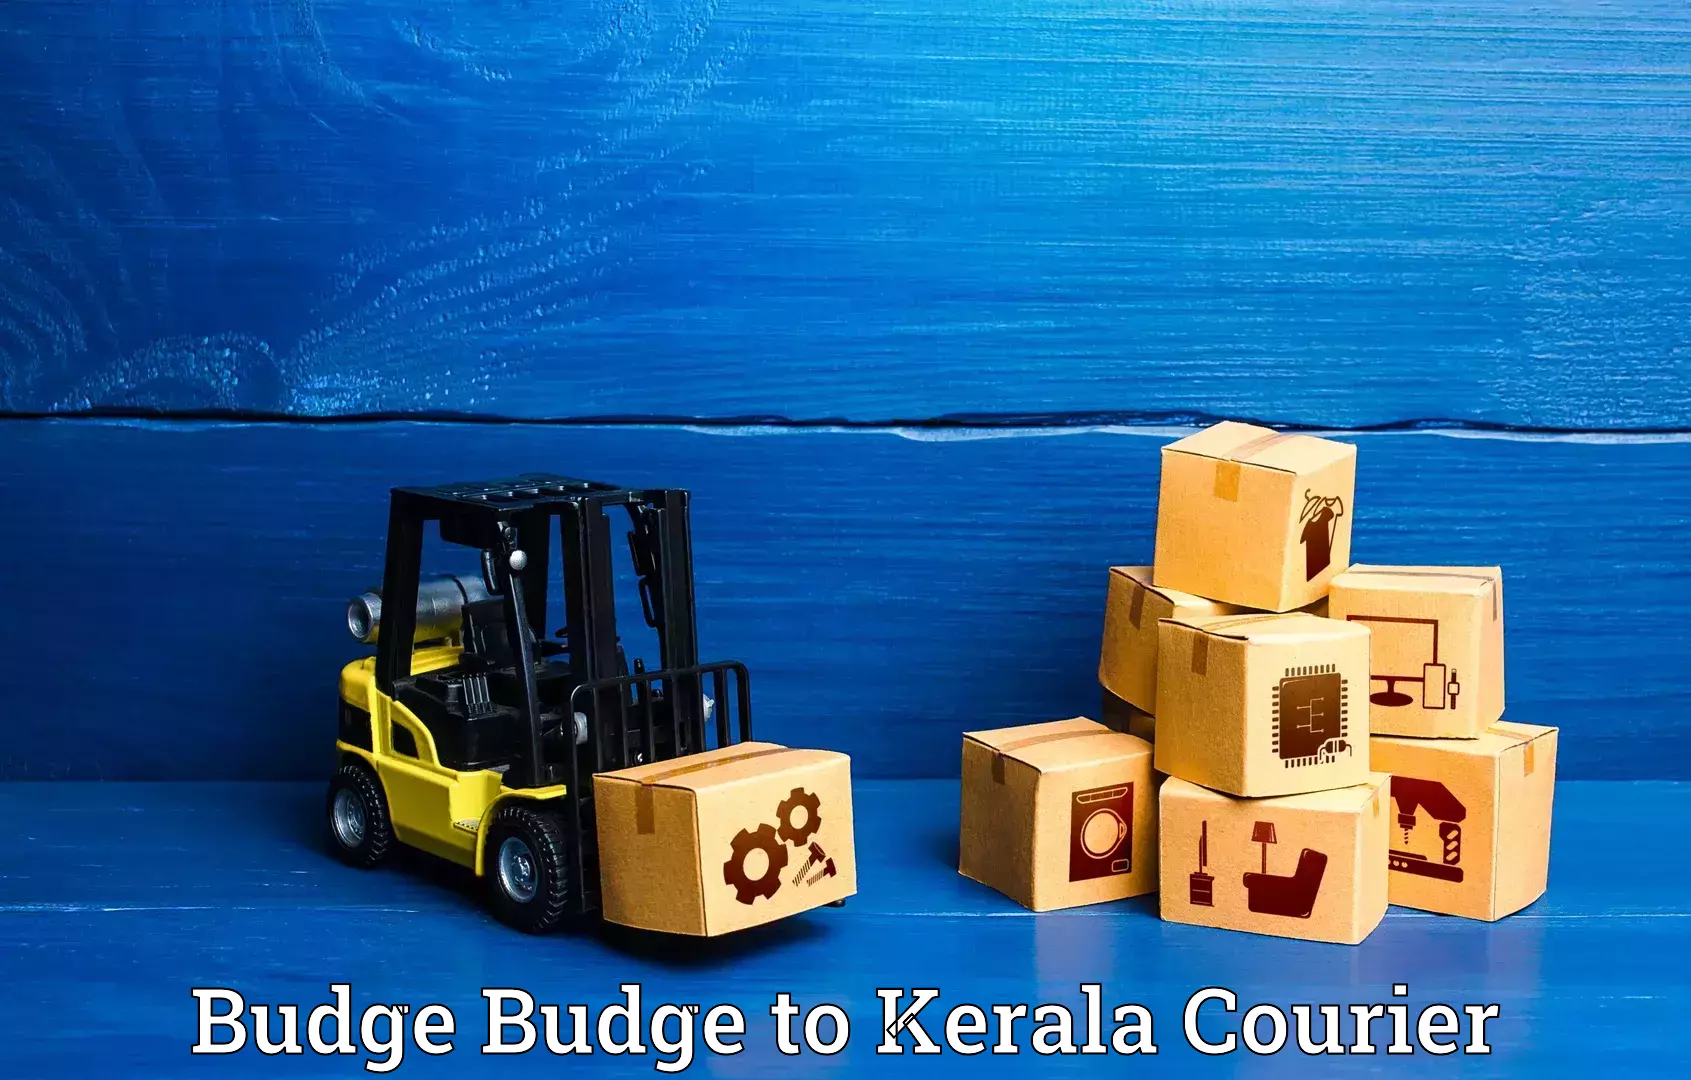 Luggage delivery app Budge Budge to Cochin Port Kochi